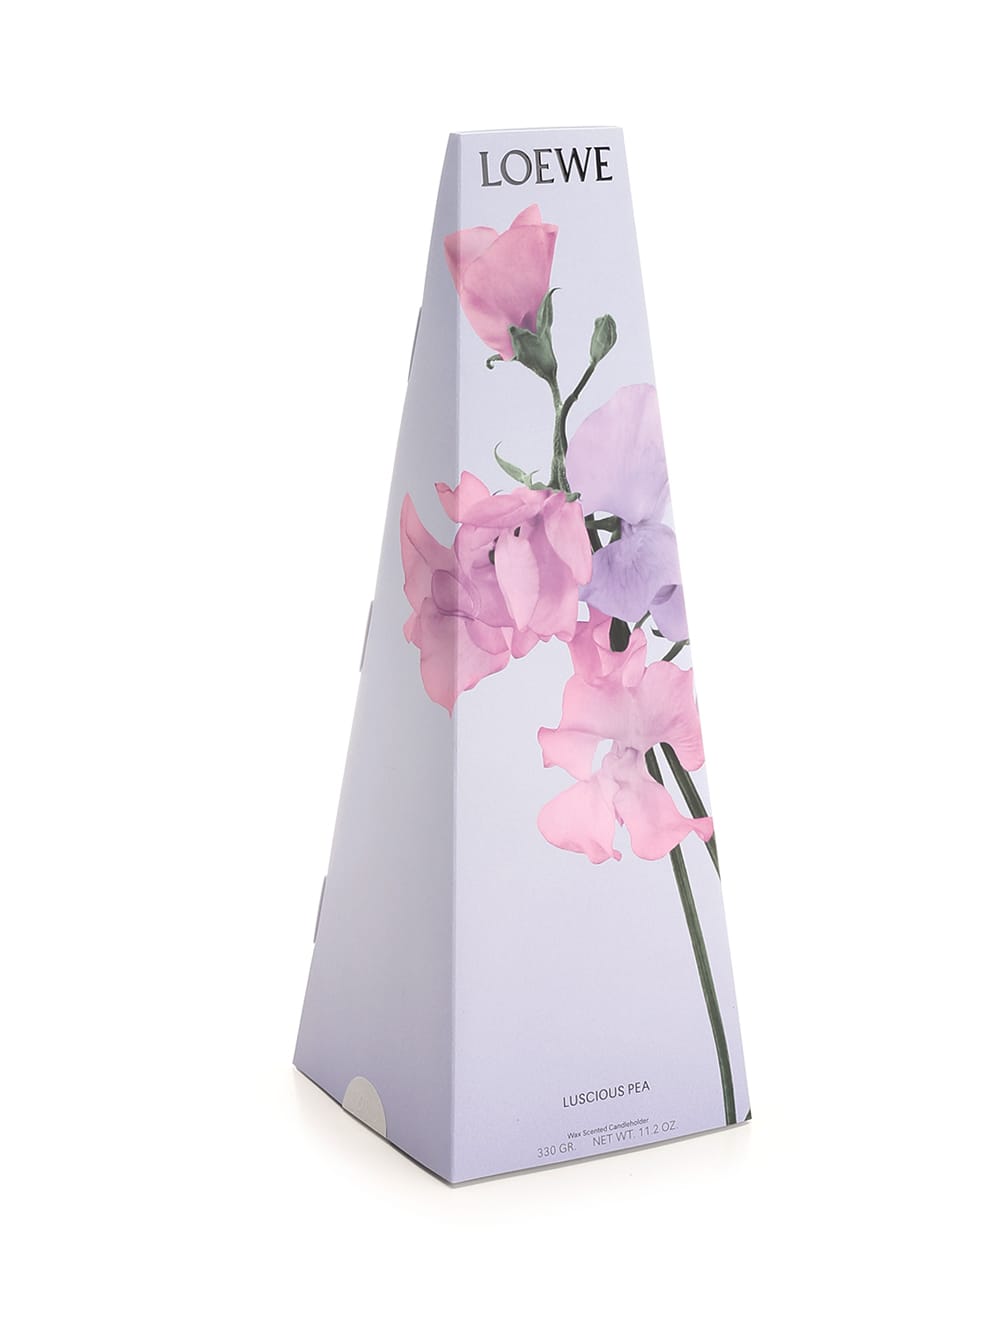 LOEWE LUCIOUS PEA SCENTED CANDLESTICK